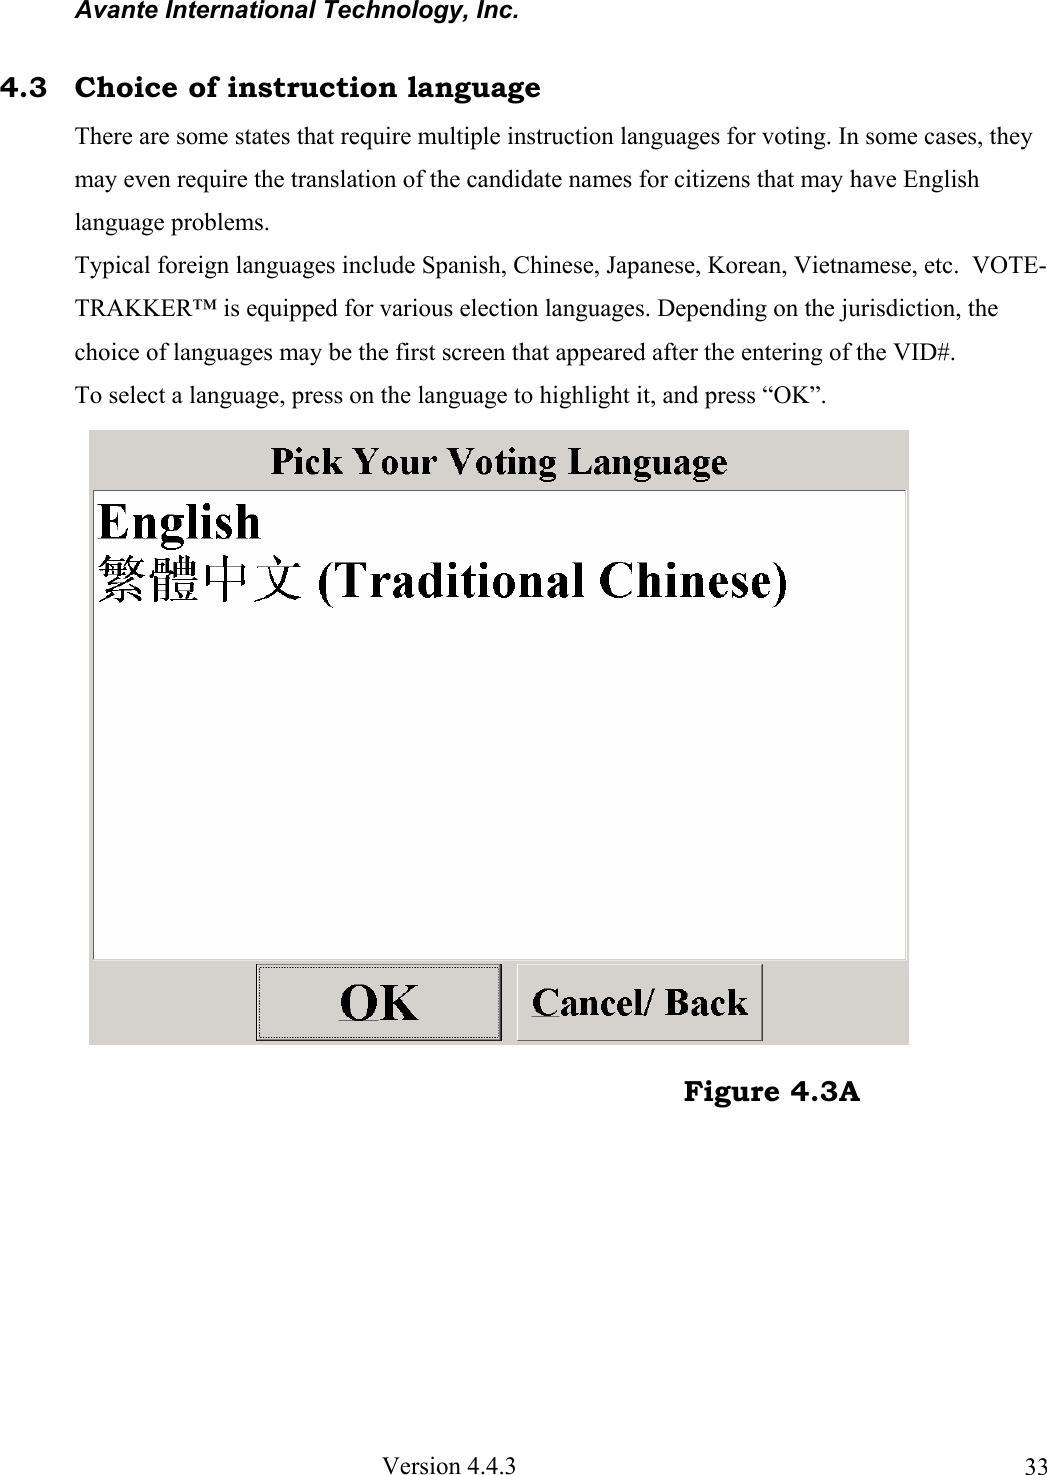 Avante International Technology, Inc.  Version 4.4.3  334.3  Choice of instruction language There are some states that require multiple instruction languages for voting. In some cases, they may even require the translation of the candidate names for citizens that may have English language problems.  Typical foreign languages include Spanish, Chinese, Japanese, Korean, Vietnamese, etc.  VOTE-TRAKKER™ is equipped for various election languages. Depending on the jurisdiction, the choice of languages may be the first screen that appeared after the entering of the VID#. To select a language, press on the language to highlight it, and press “OK”.                                                                                   Figure 4.3A 